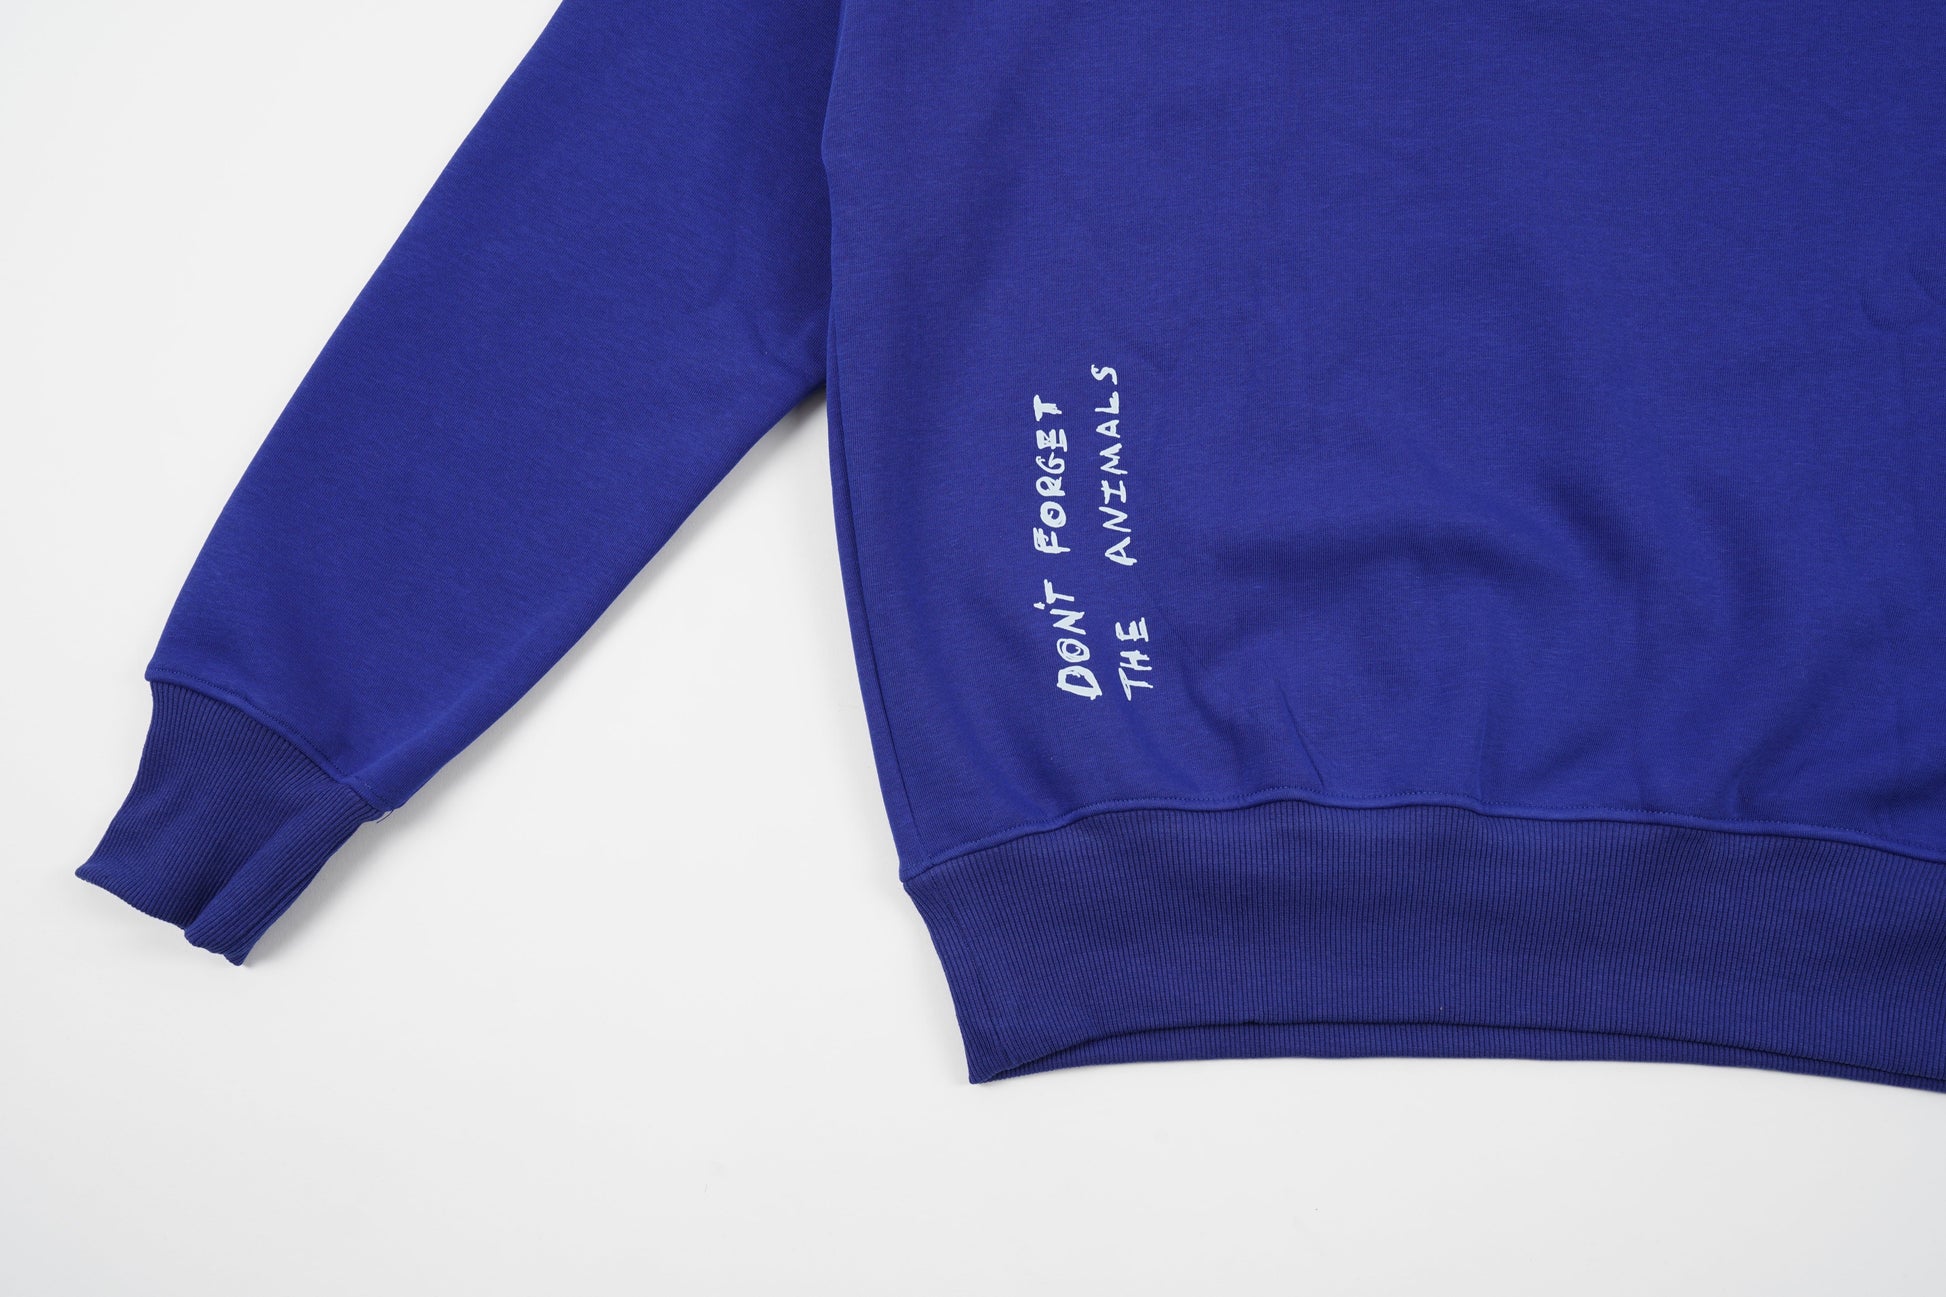 Blue Orangutan Endangered Species sweater made of organic cotton in the streetwear style with the phrase Don't Forget The Animals